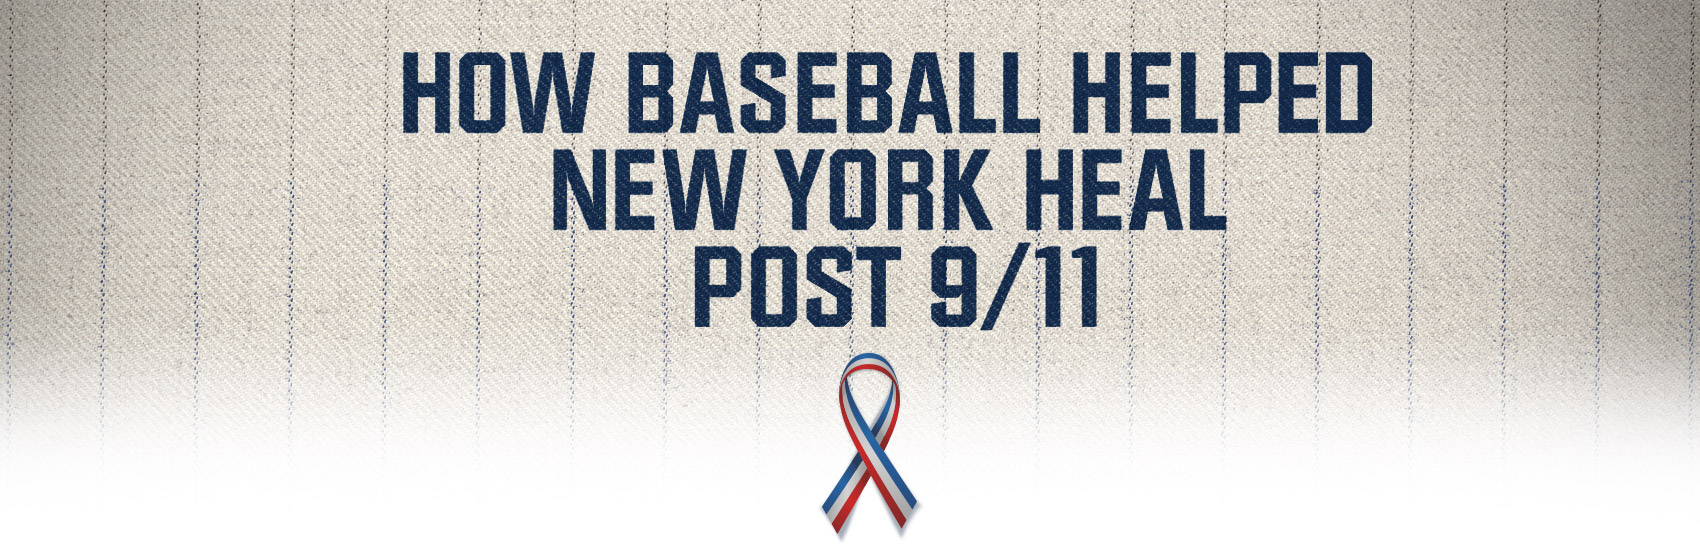 Remembering how the Yankees helped us heal after 9/11 